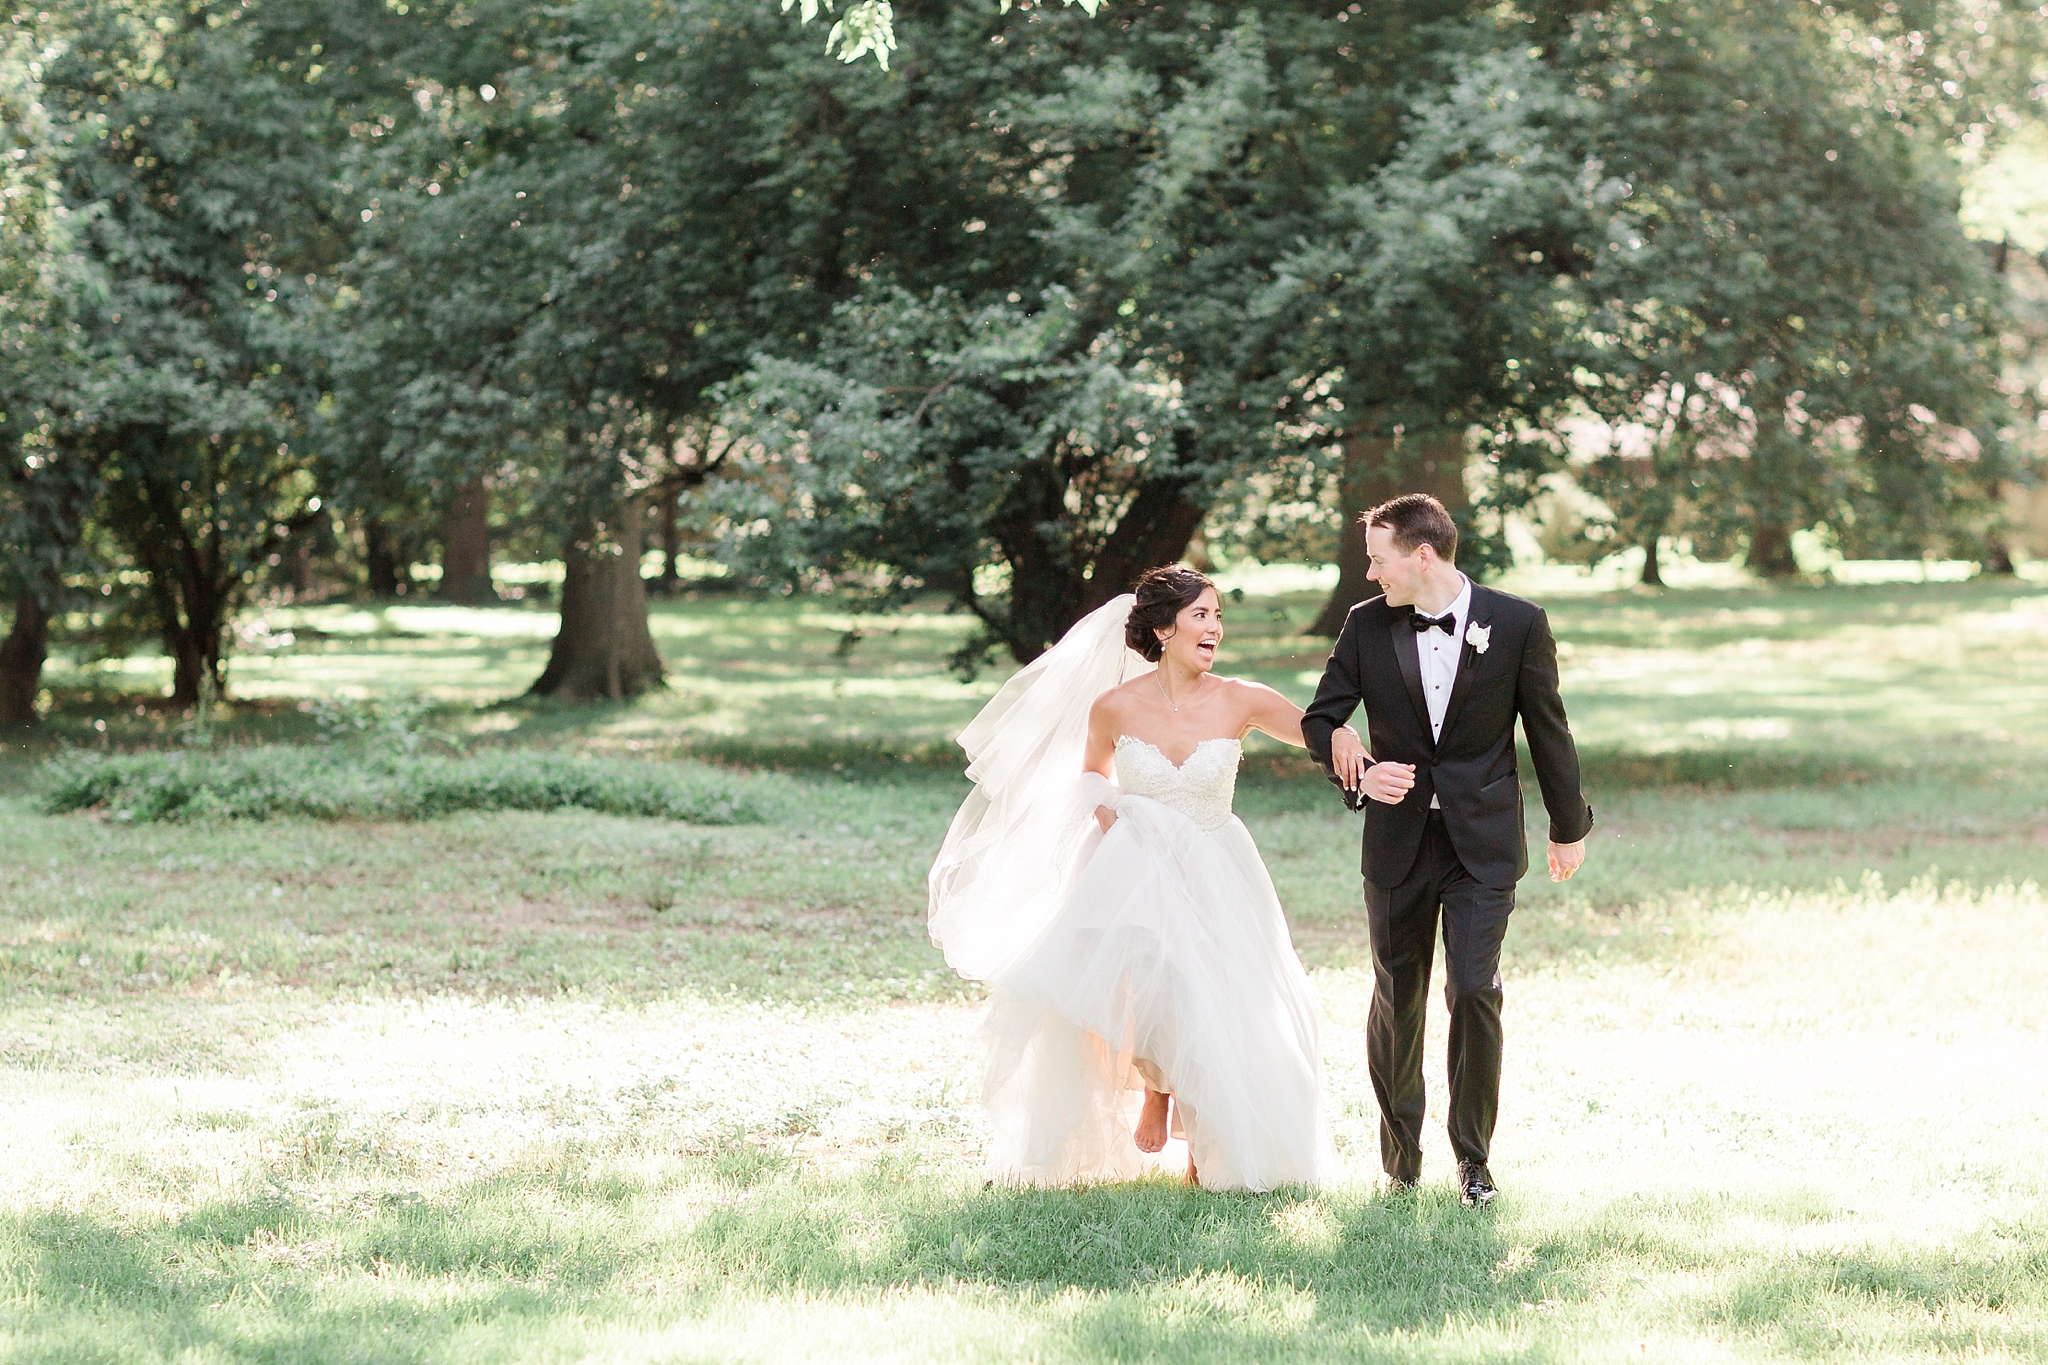 This Washington, DC wedding photographer shares her favorite mantra for bride's to remember on the big day.